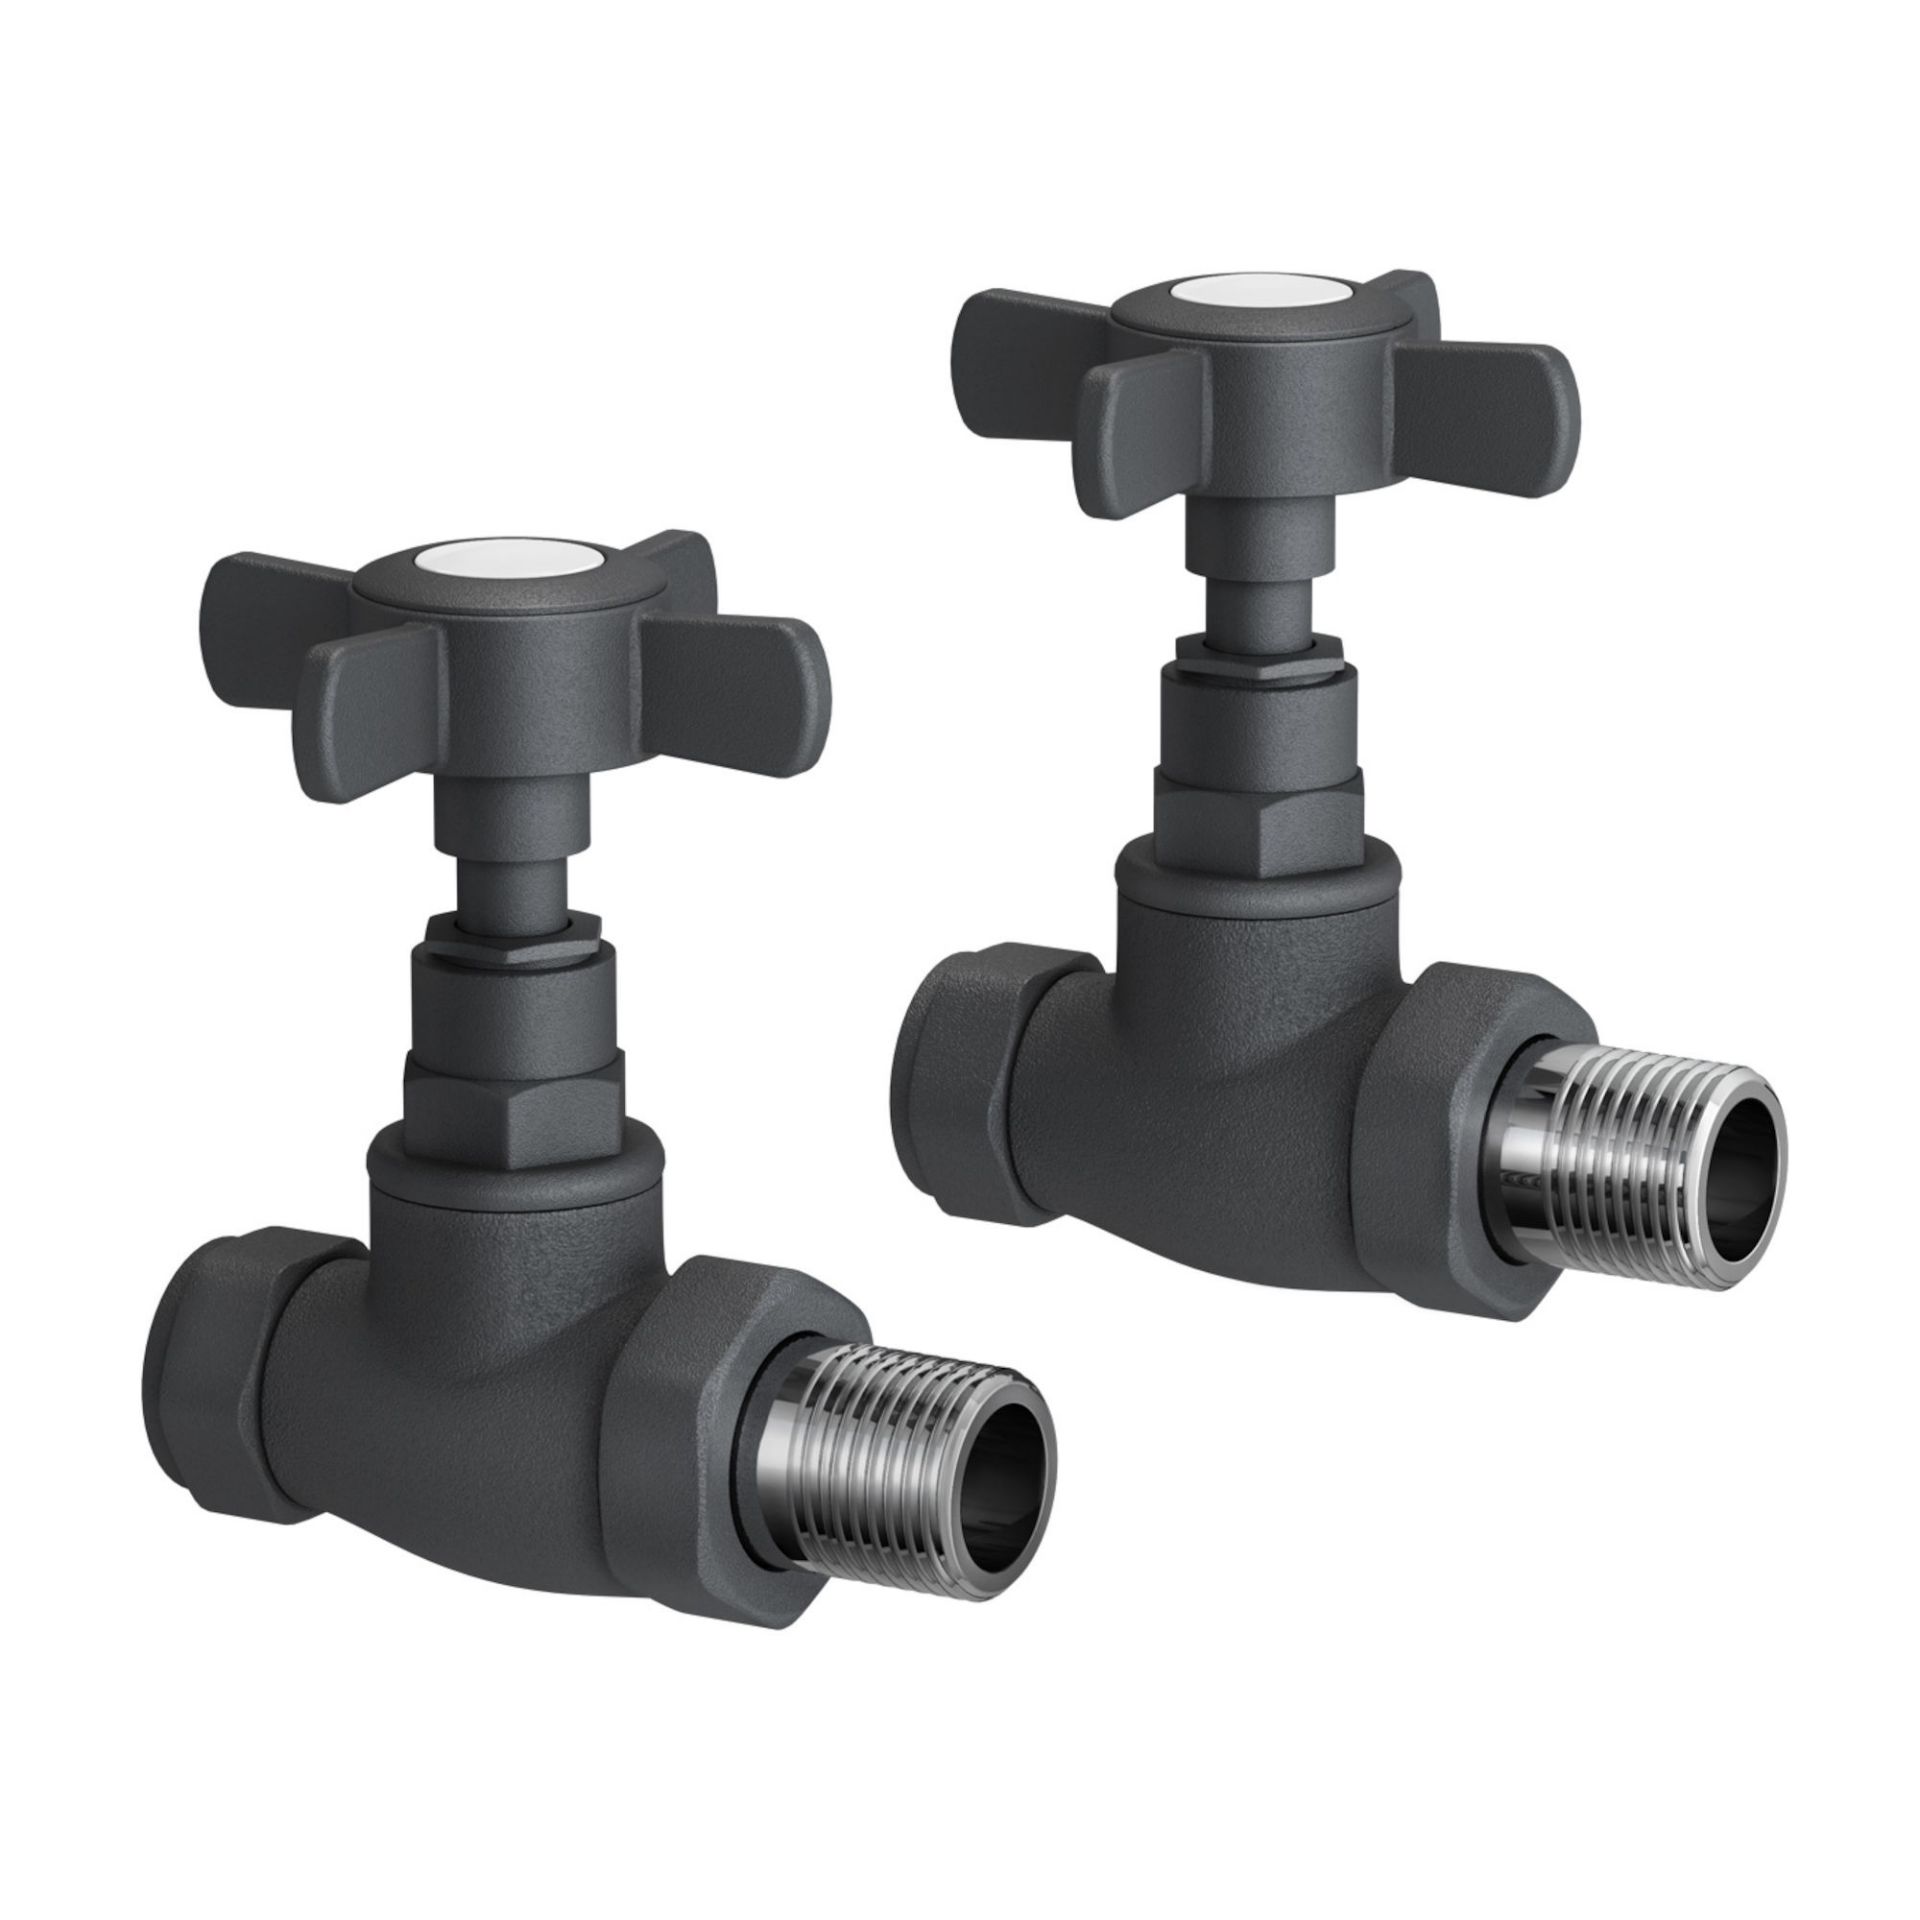 (MW76) Anthracite Standard Connection Straight Radiator Valves 15mm Contemporary anthracite finish